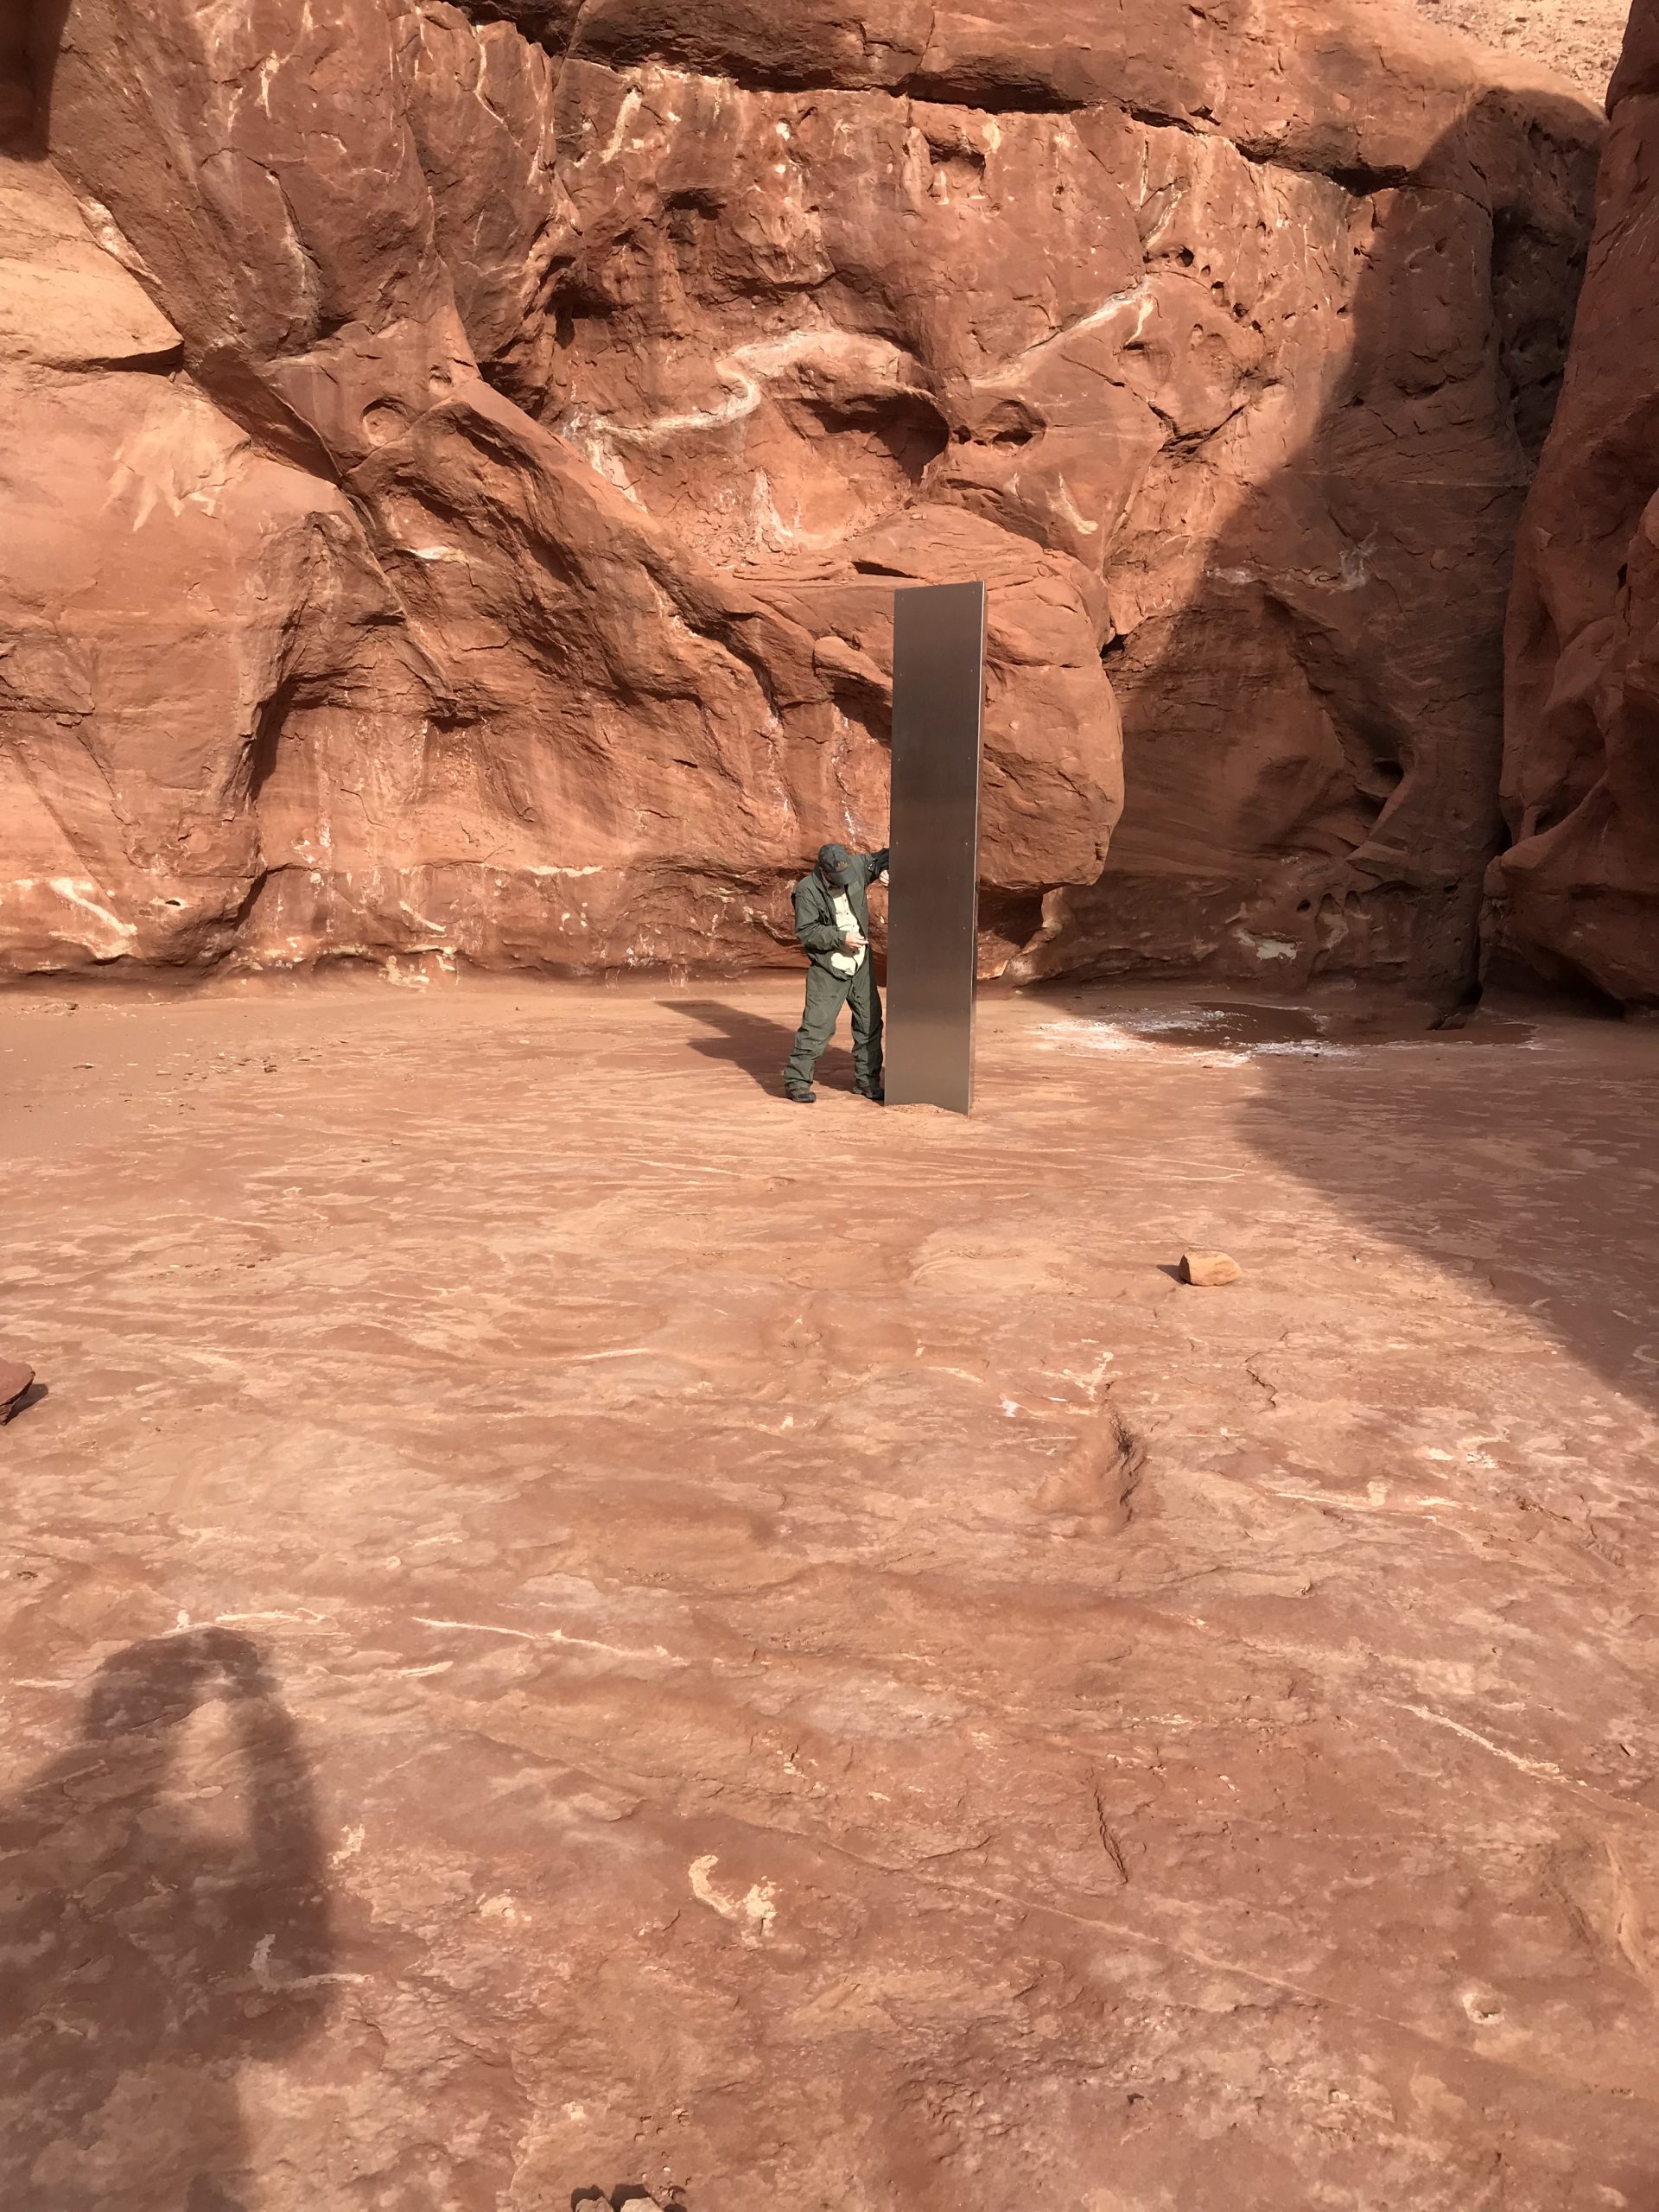 A crew member from the DPS Aero Bureau mission stands next to the metal monolith implanted in the ground in red rock.